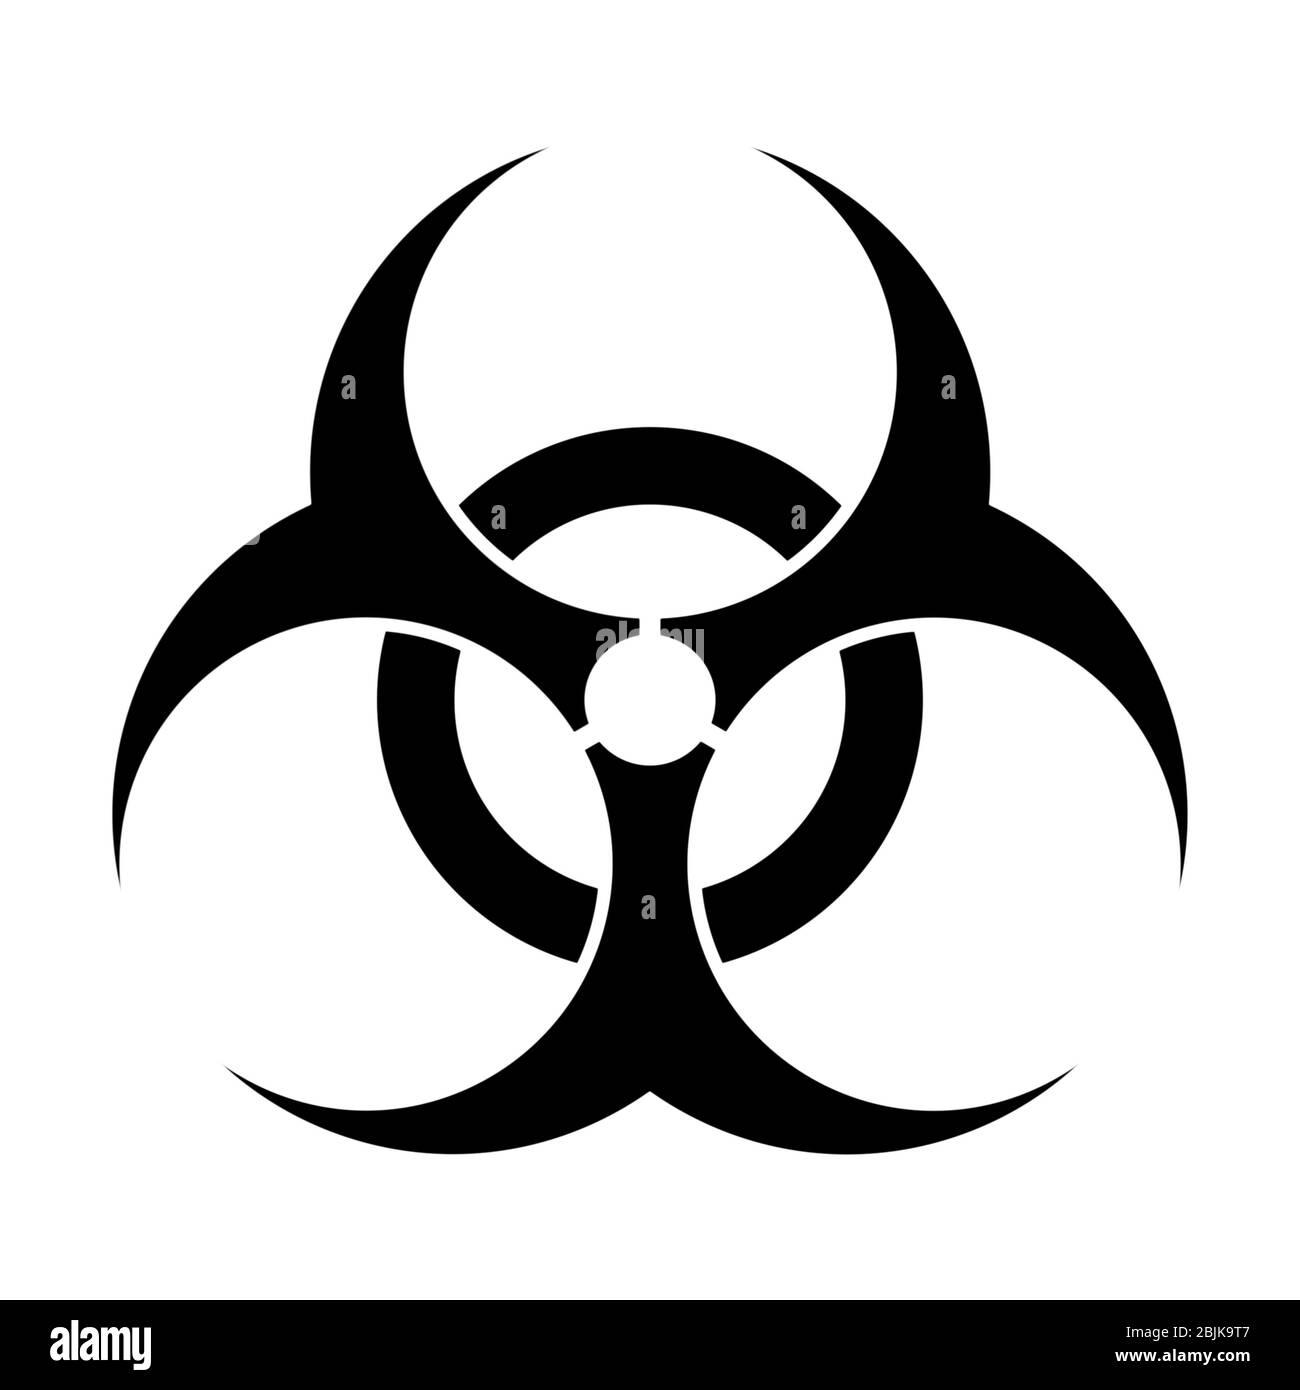 Biohazard Black Silhuette Sign Isolated On White Background. Stock Photo